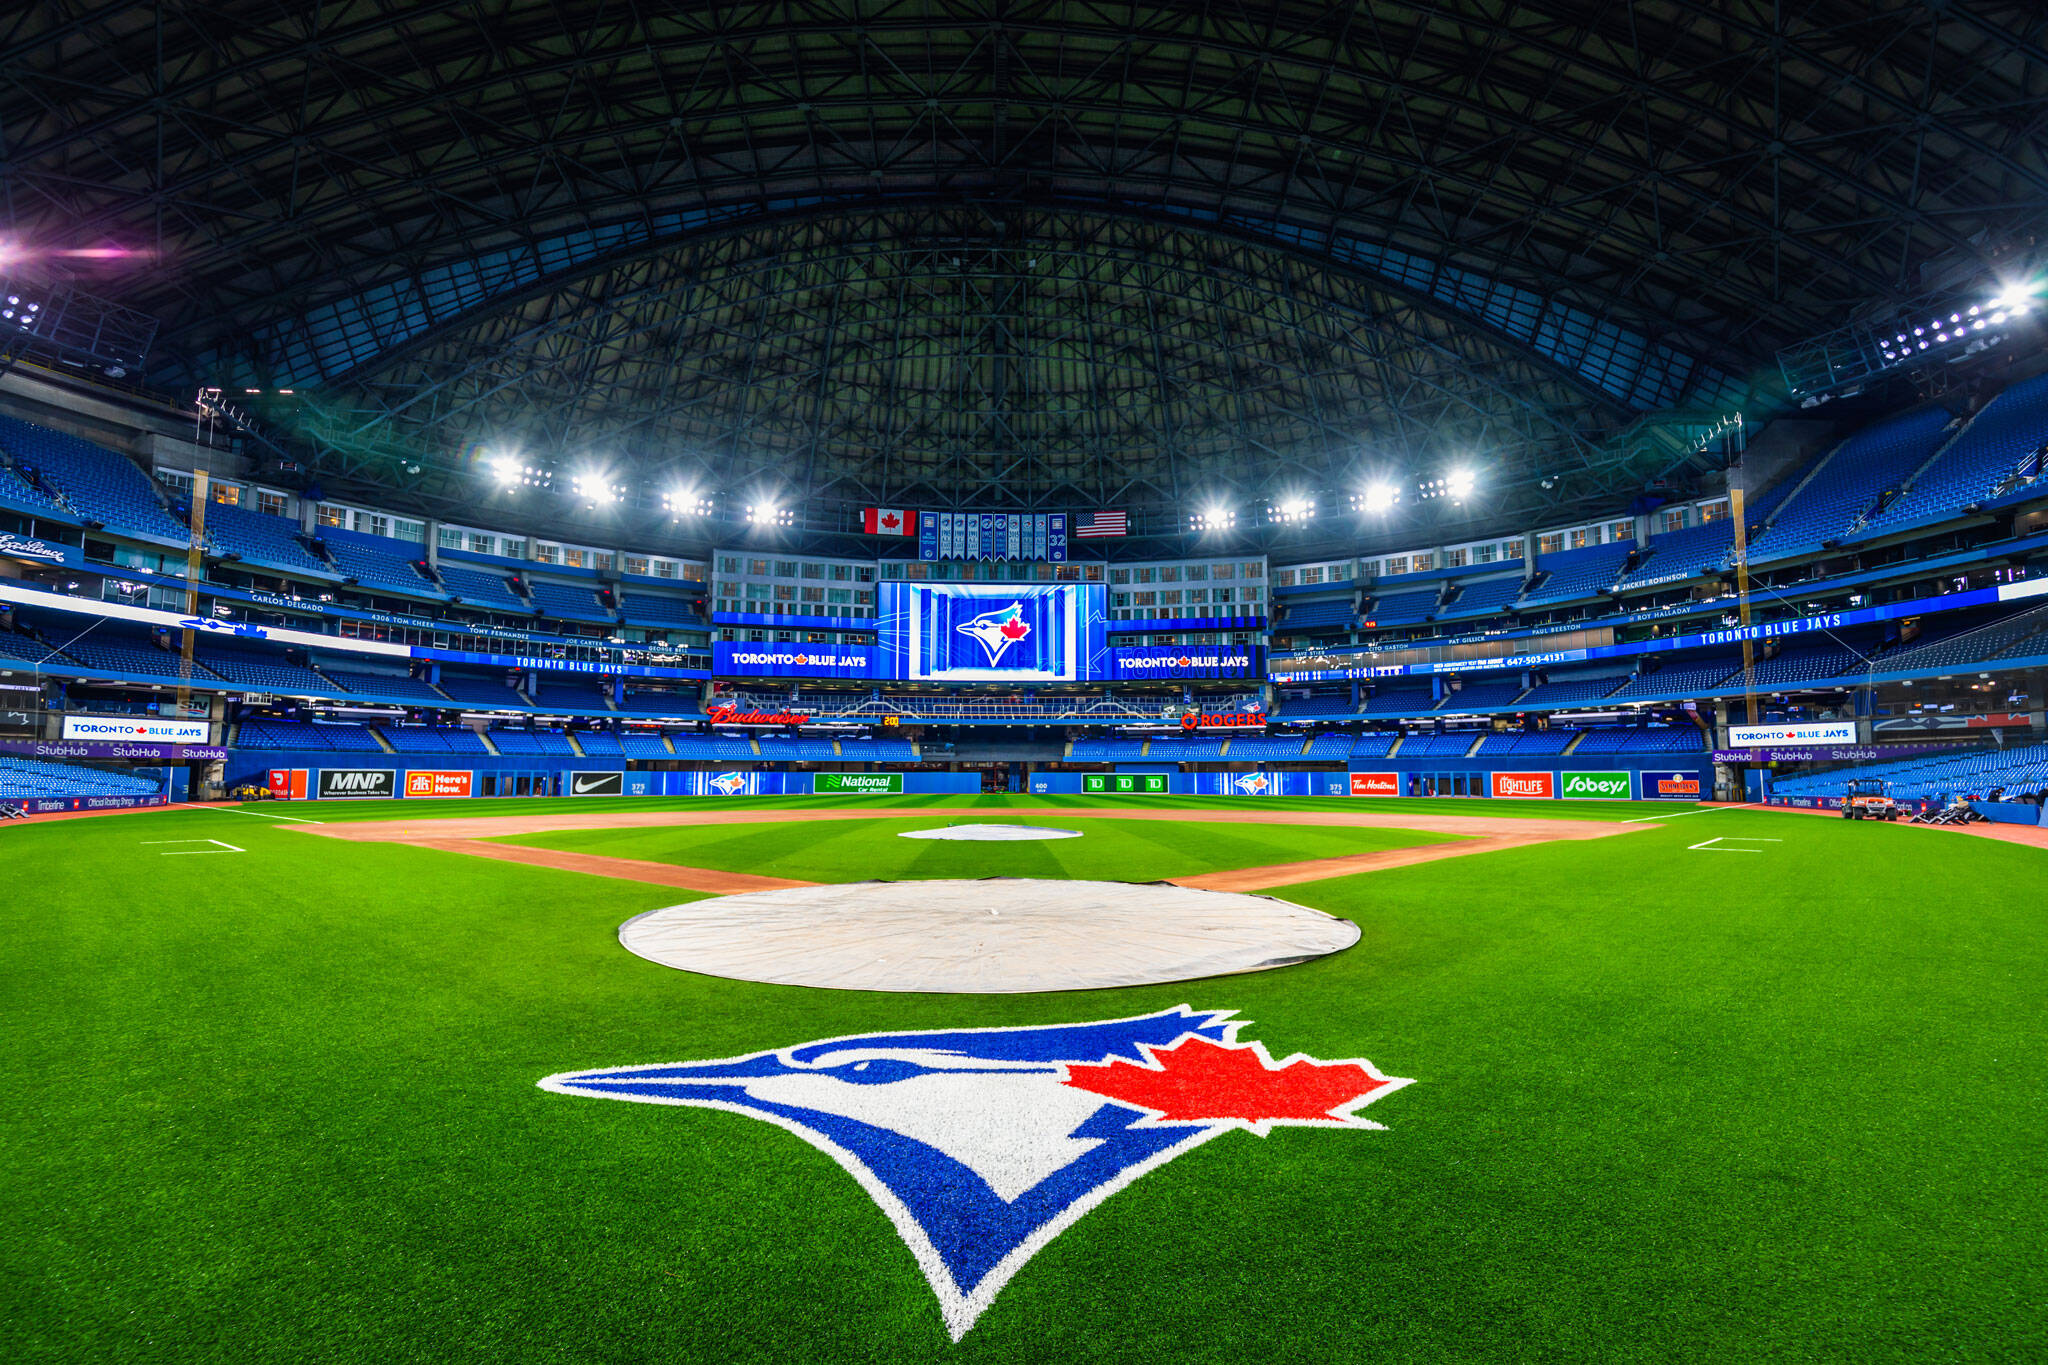 Toronto Blue Jays playoffs start Friday. Here's what you need to know